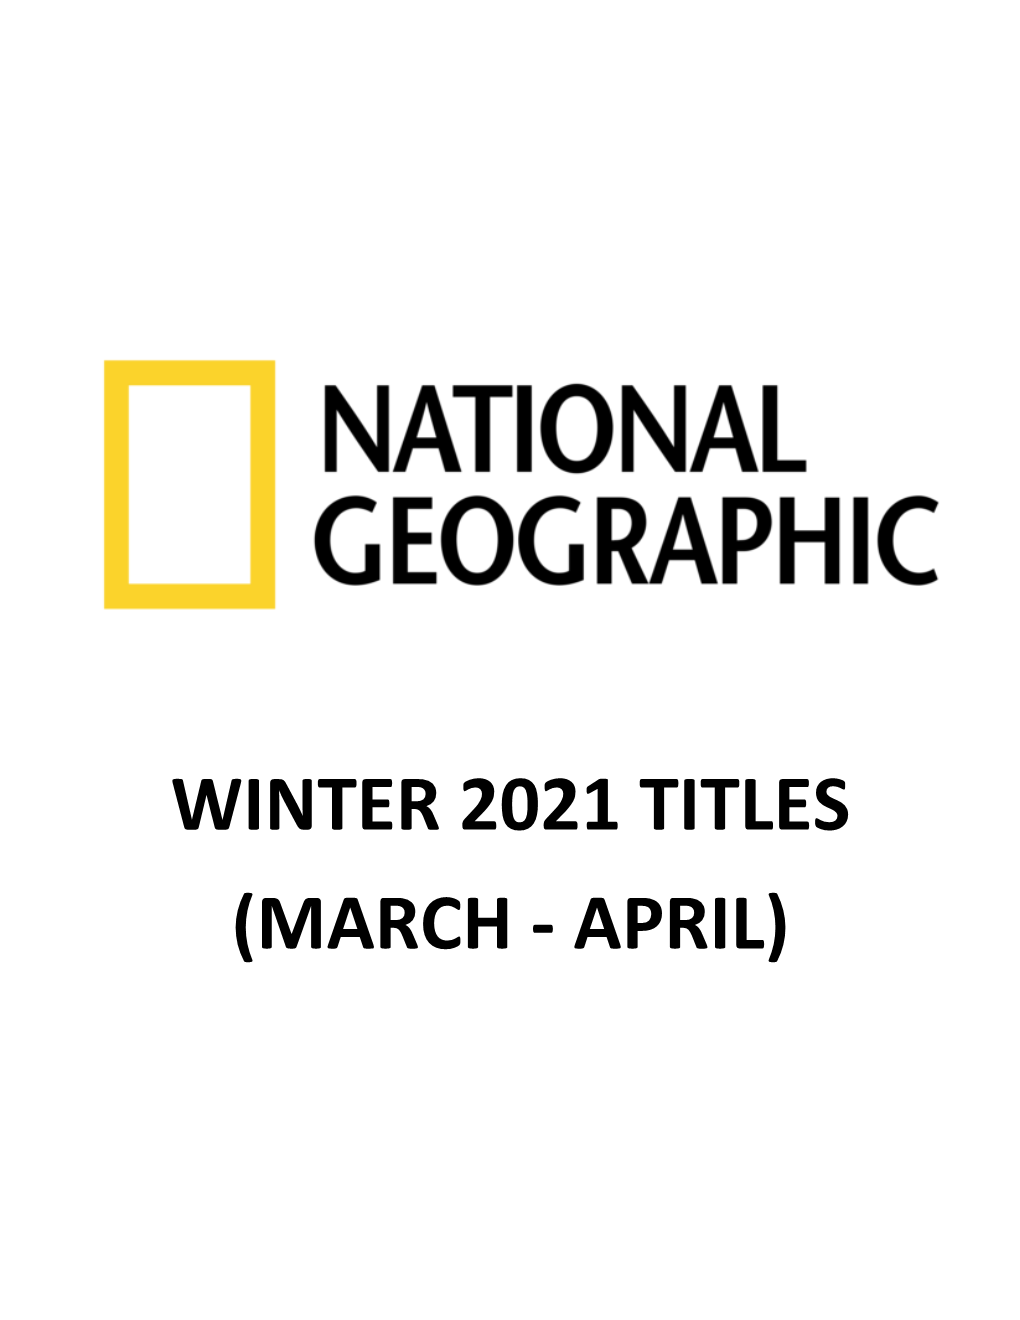 National Geographic Winter 2021